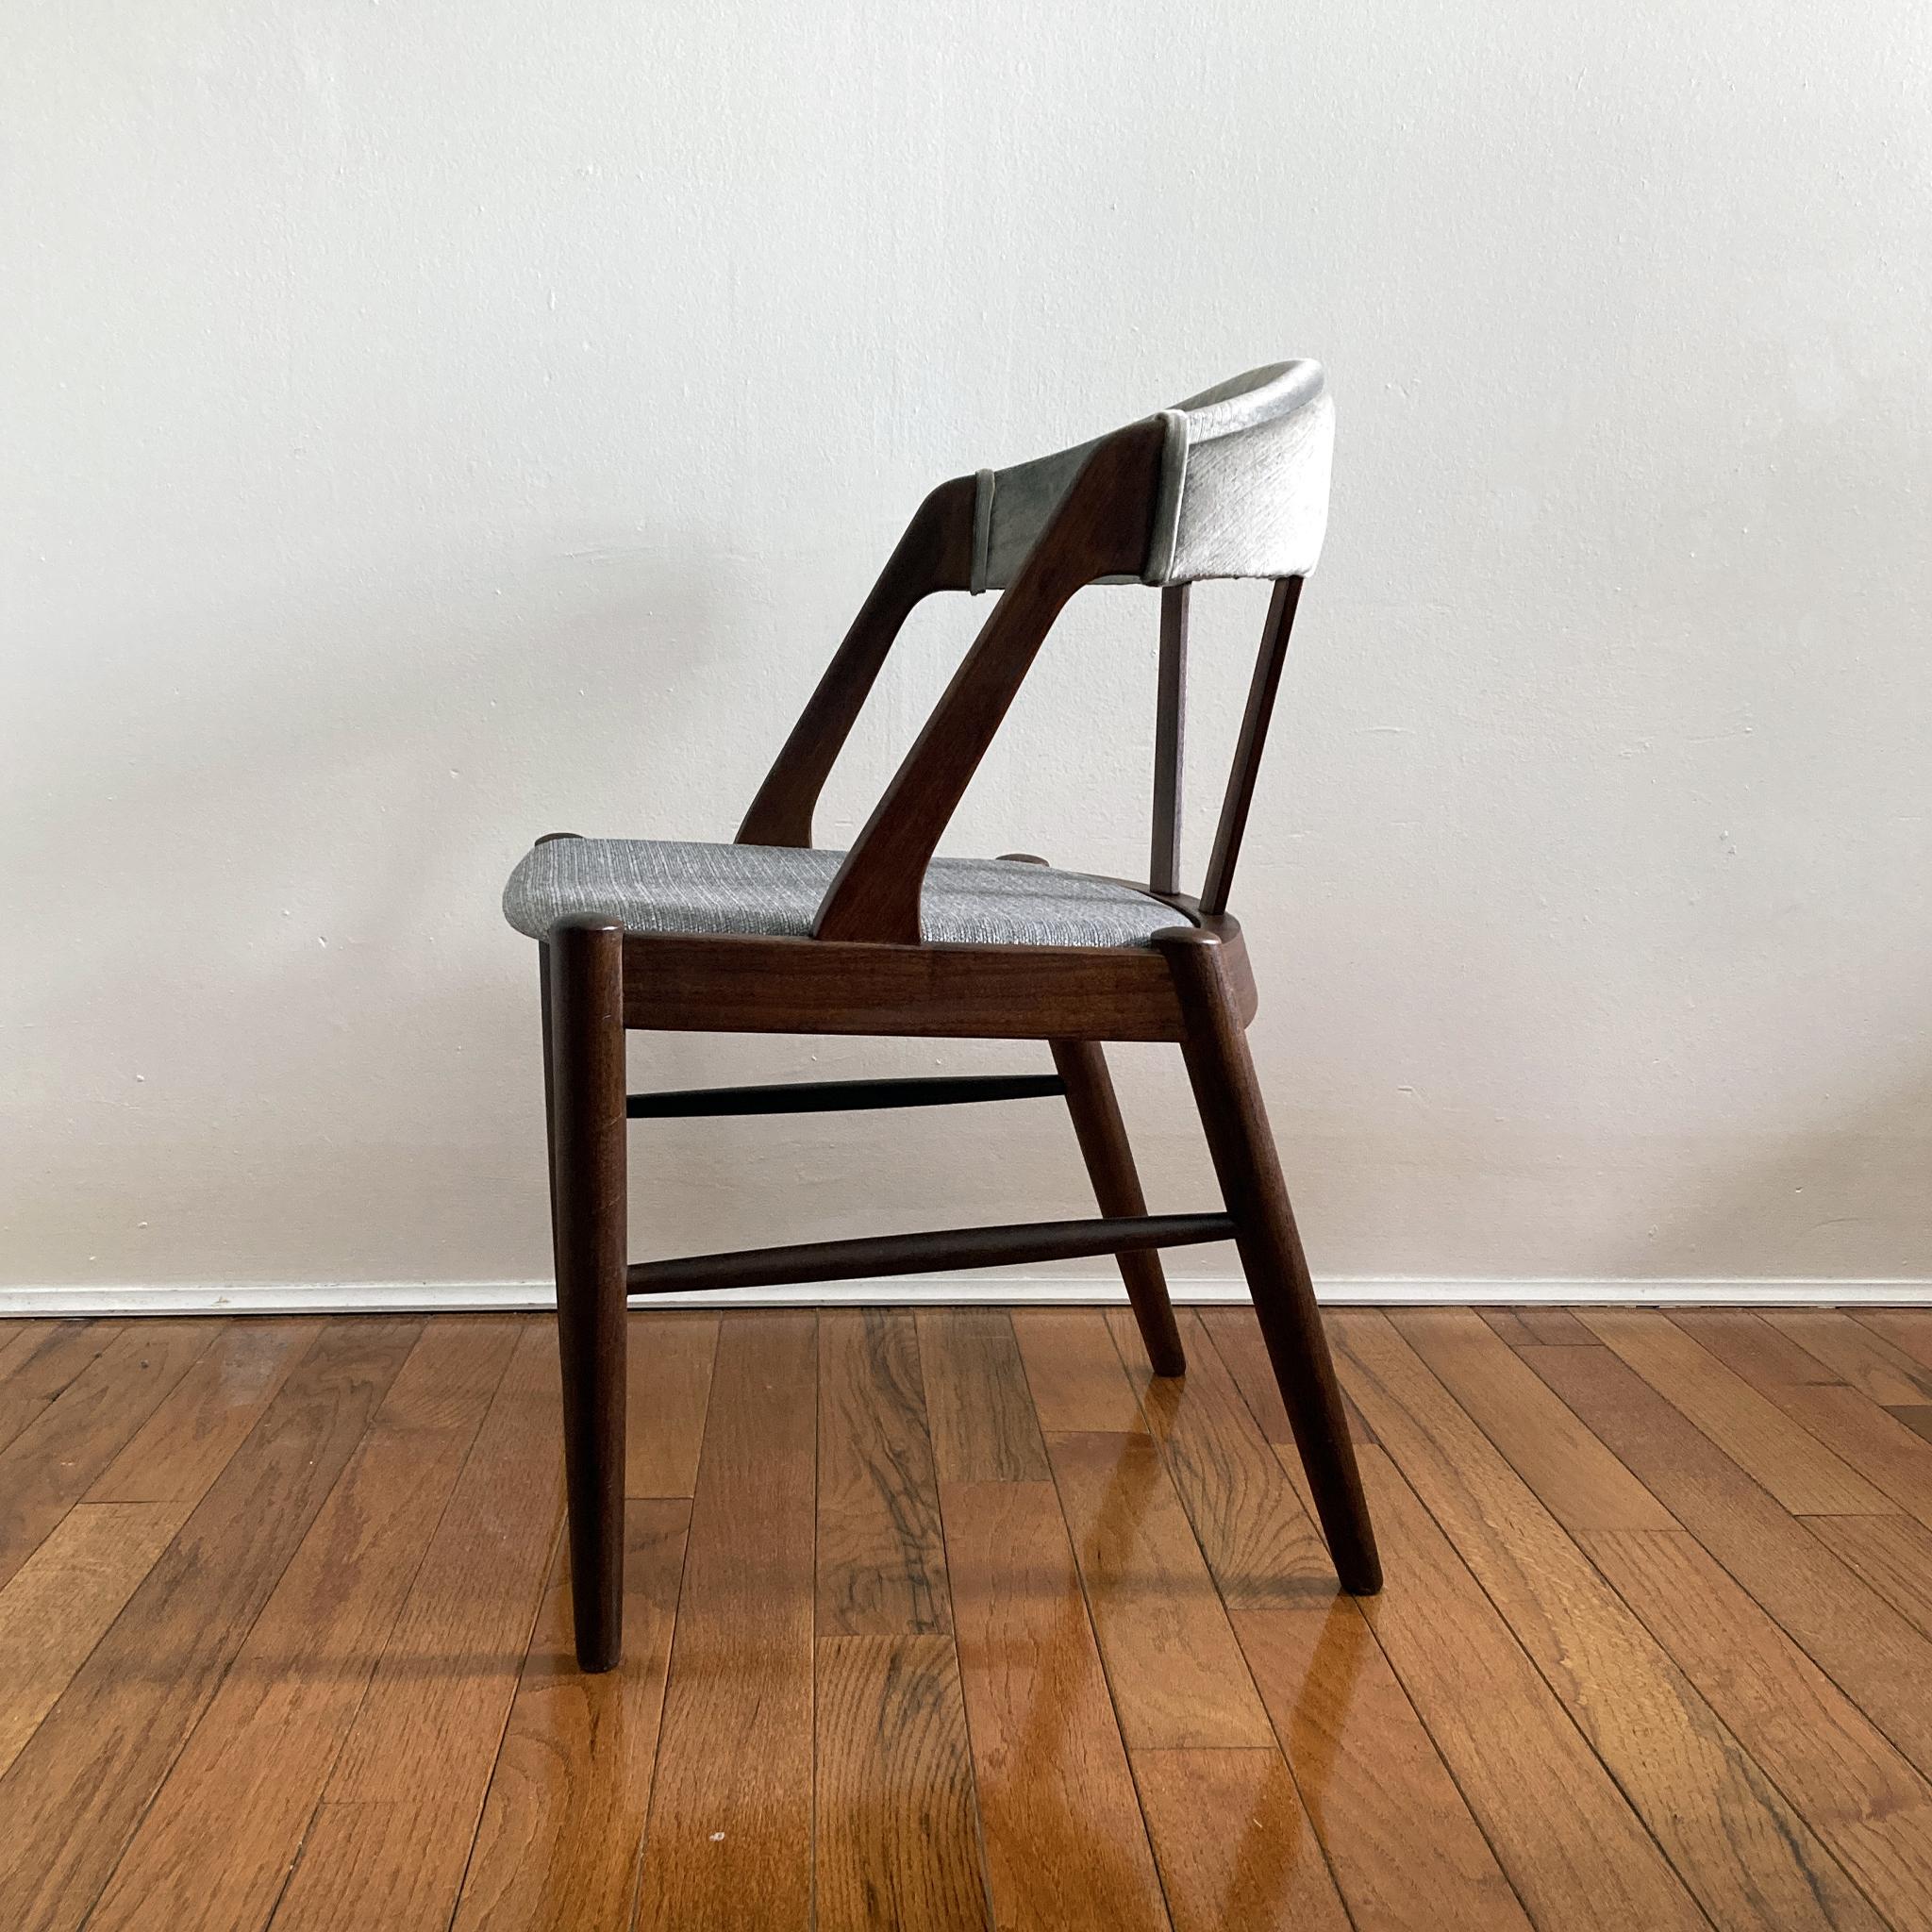 Mid-20th Century Kai Kristiansen Style Reupholstered Curved Back Gray Teak Chair, Danish, 1960s For Sale